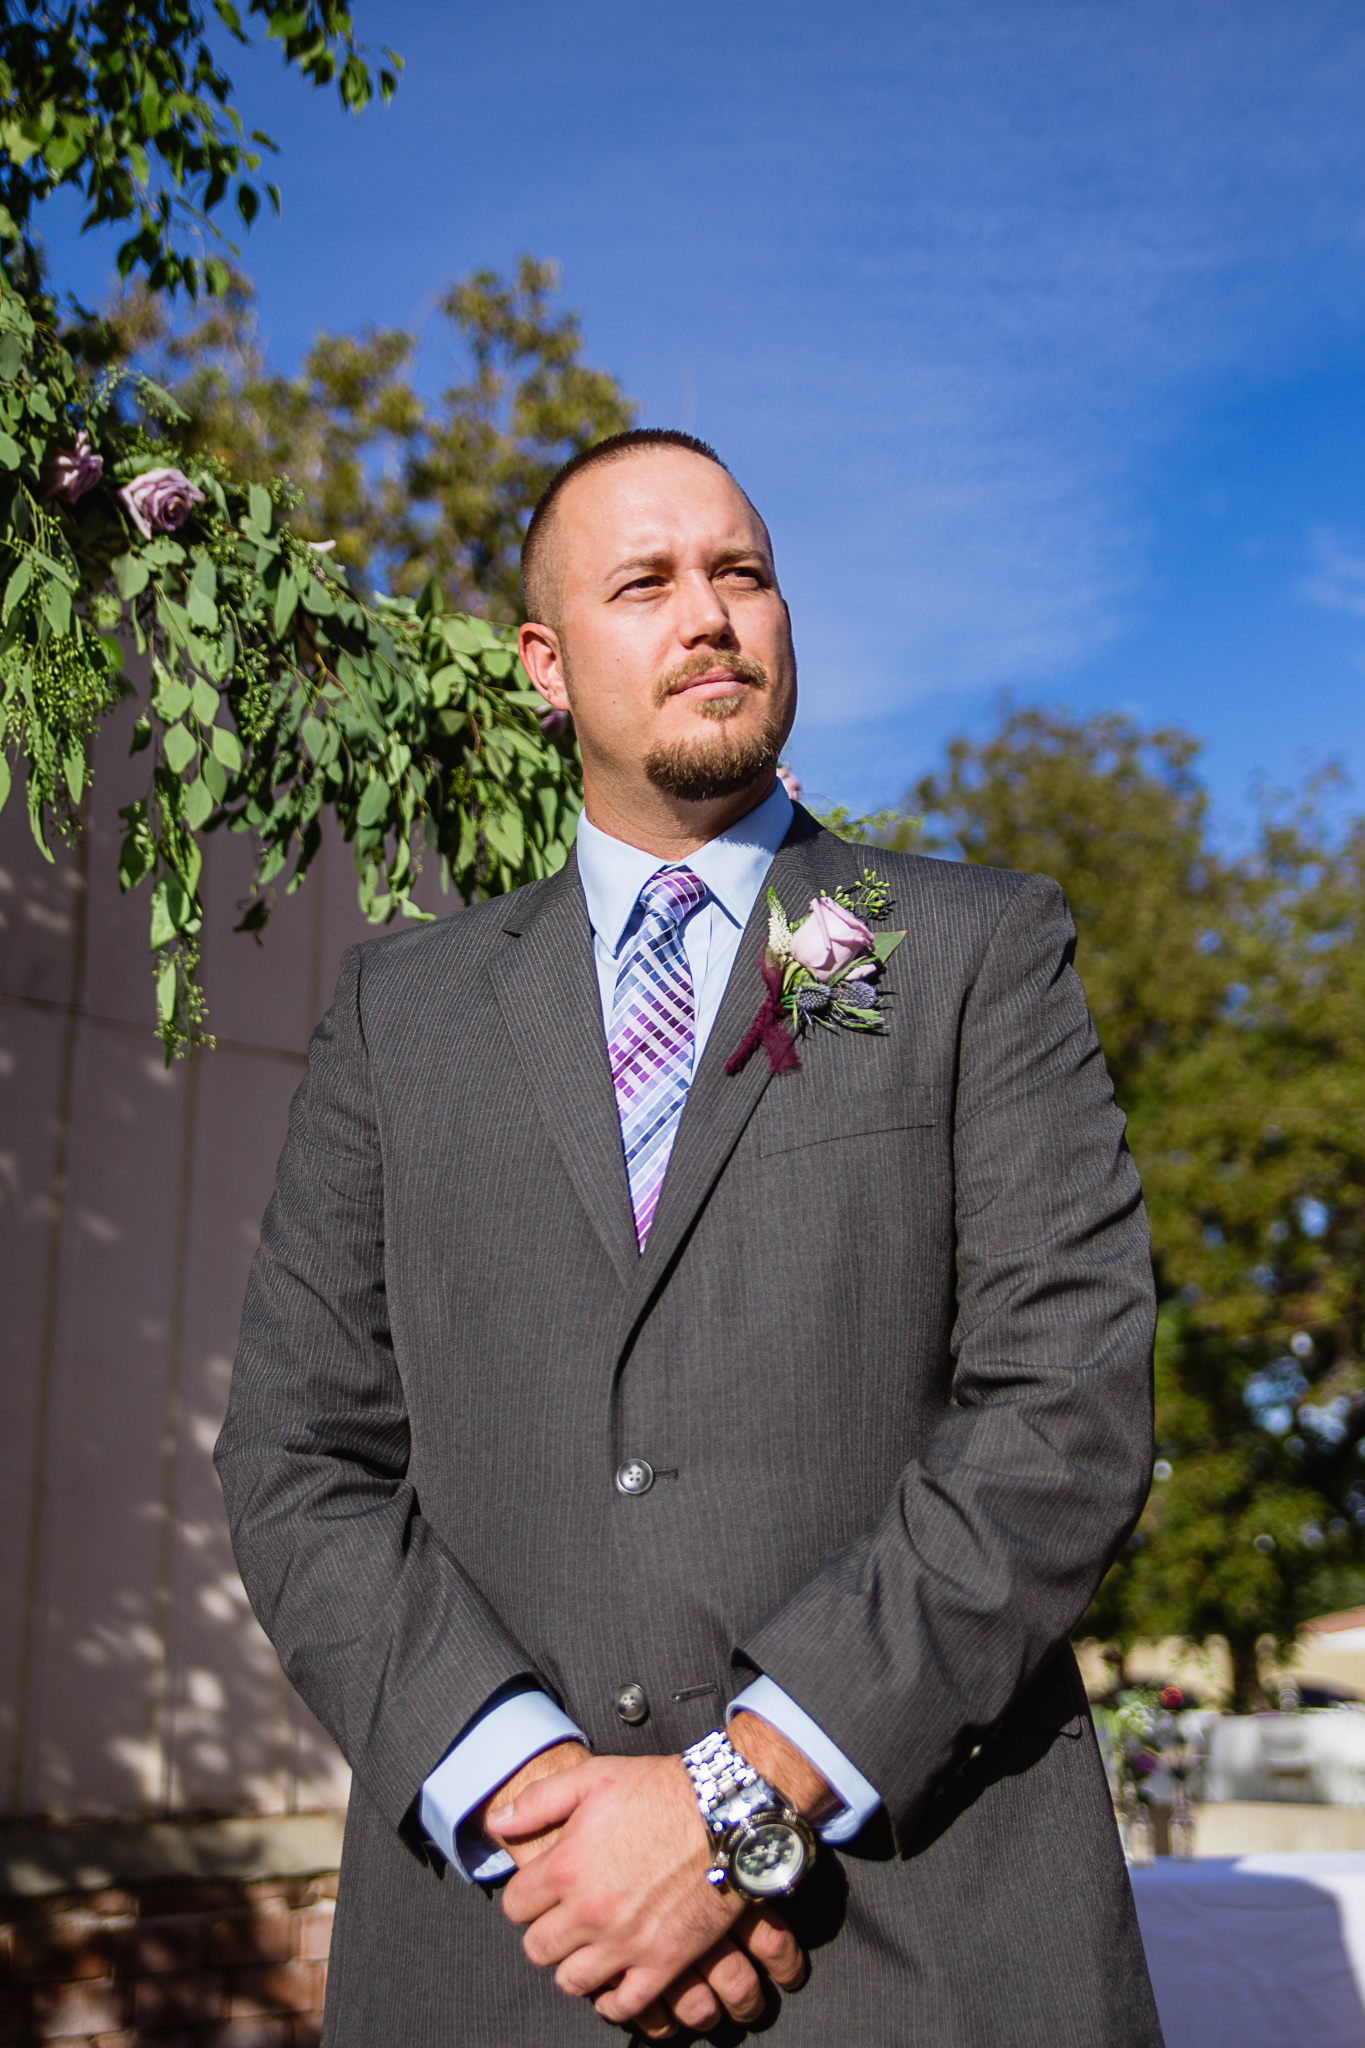 Groom watching his bride walk down the aisle by PMA Photography.